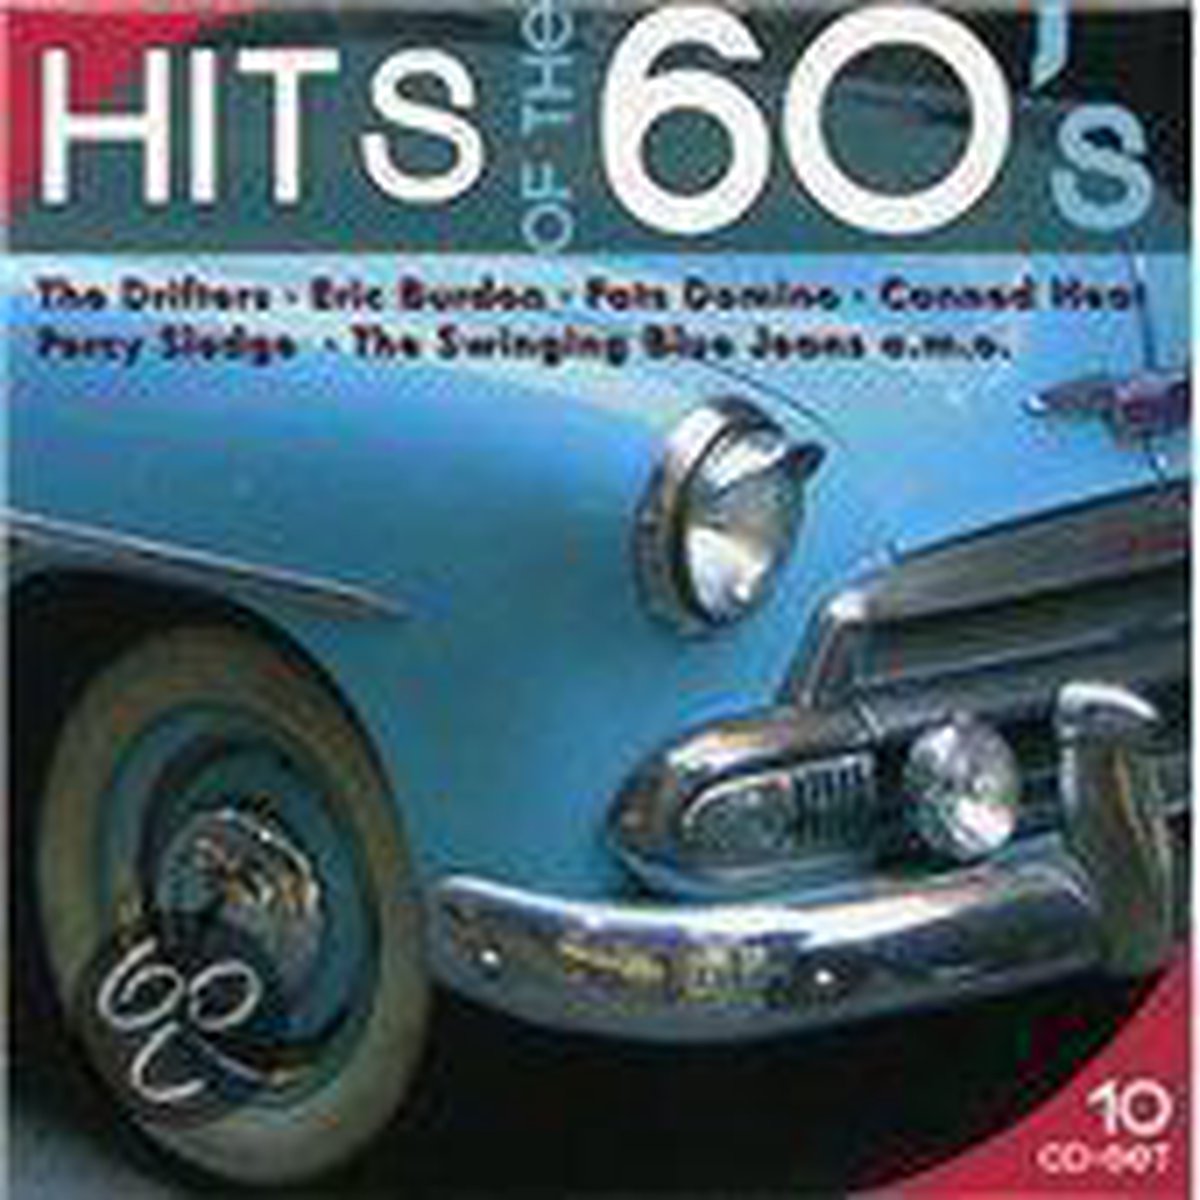 Afbeelding van product Hits of the 60's [Documents]  - various artists